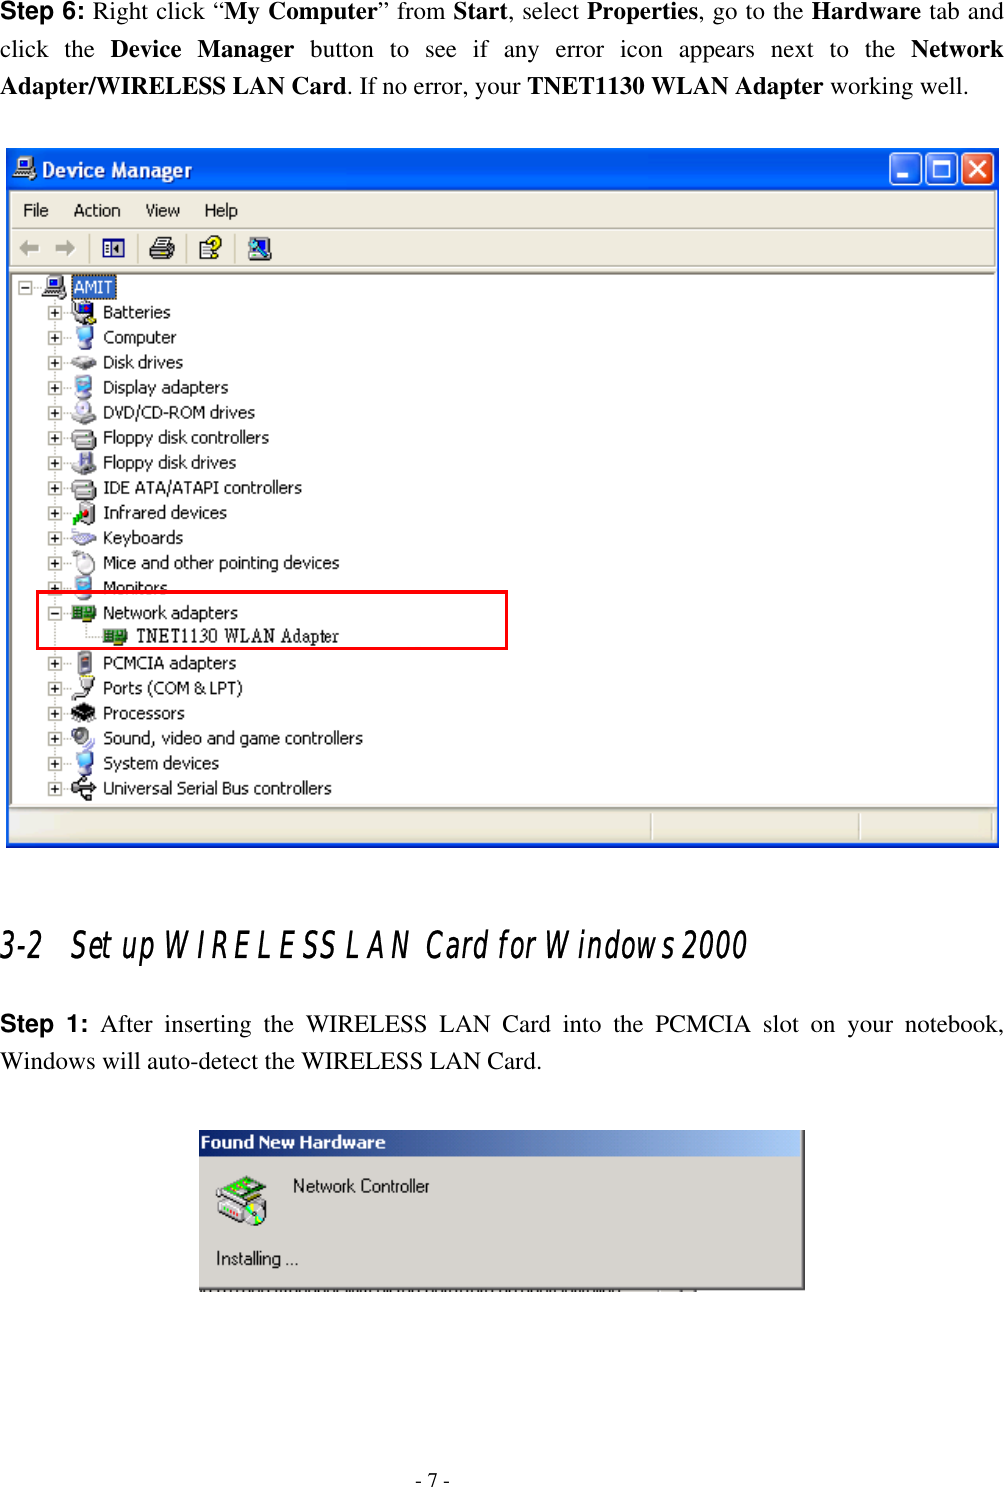    - 7 - Step 6: Right click “My Computer” from Start, select Properties, go to the Hardware tab and click the Device Manager button to see if any error icon appears next to the Network Adapter/WIRELESS LAN Card. If no error, your TNET1130 WLAN Adapter working well.   3-2   Set up WIRELESS LAN Card for Windows 2000 Step 1: After inserting the WIRELESS LAN Card into the PCMCIA slot on your notebook, Windows will auto-detect the WIRELESS LAN Card.      